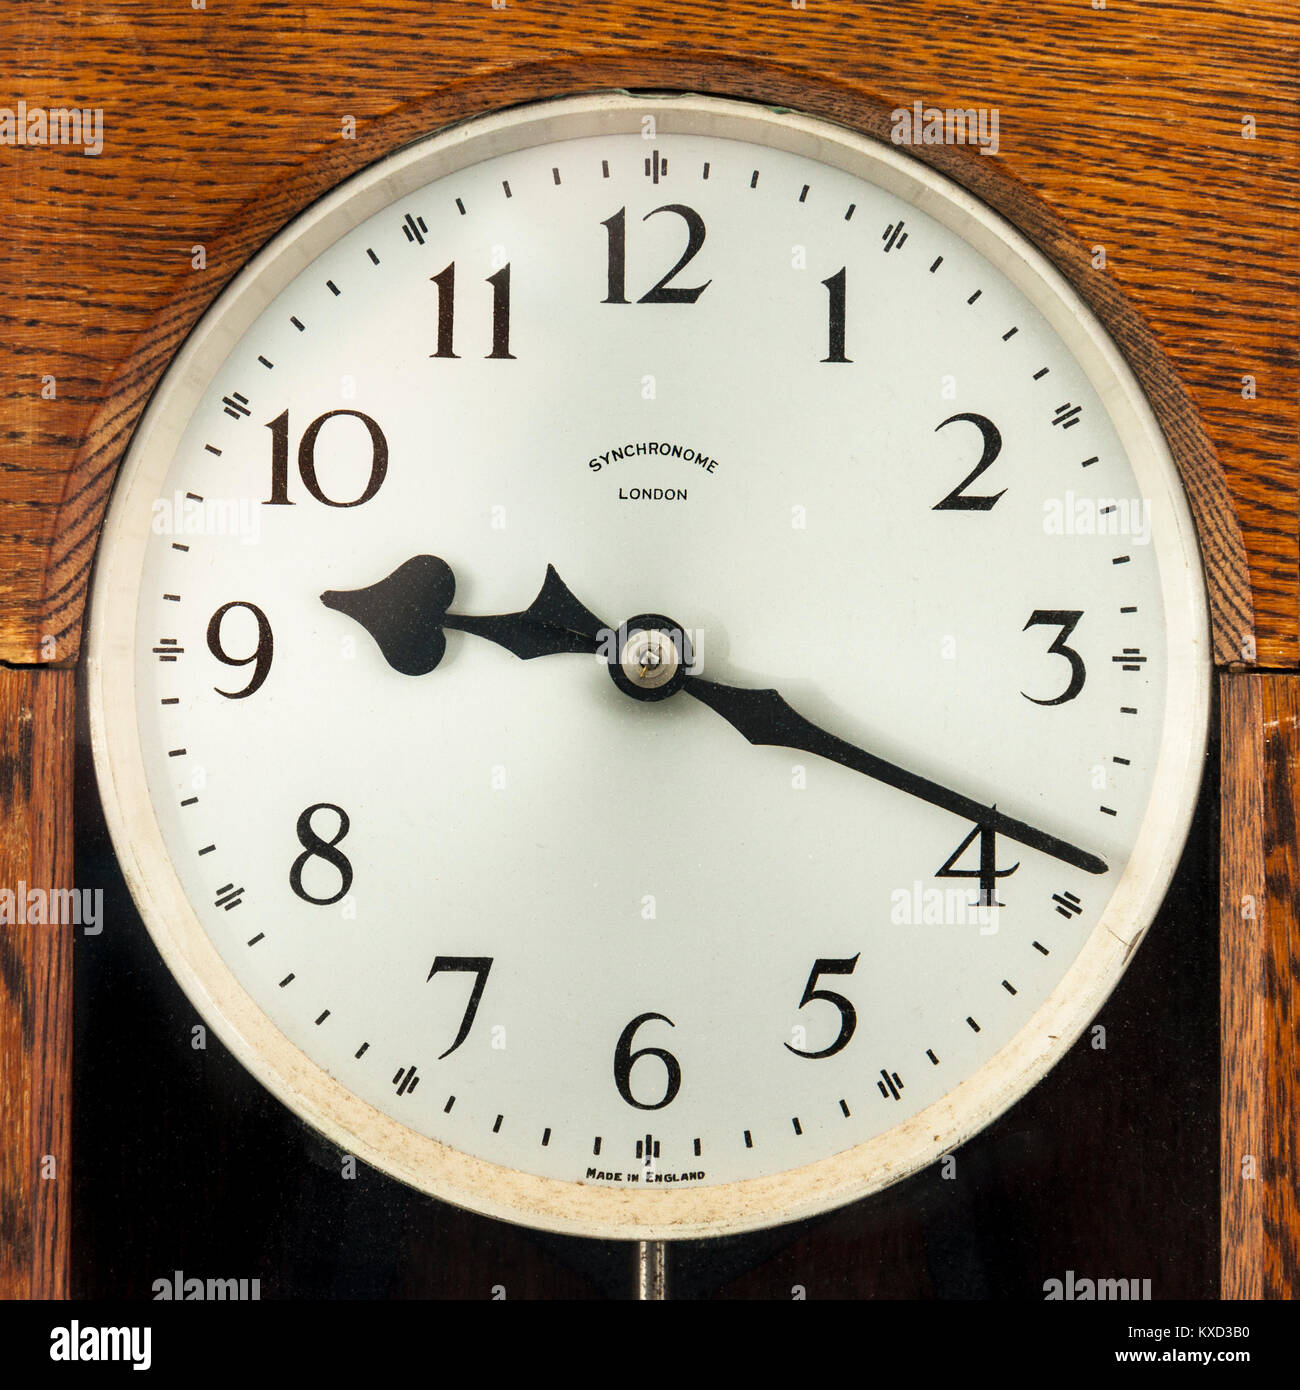 Vintage 1950's Synchronome electric master clock (No 5543) Stock Photo